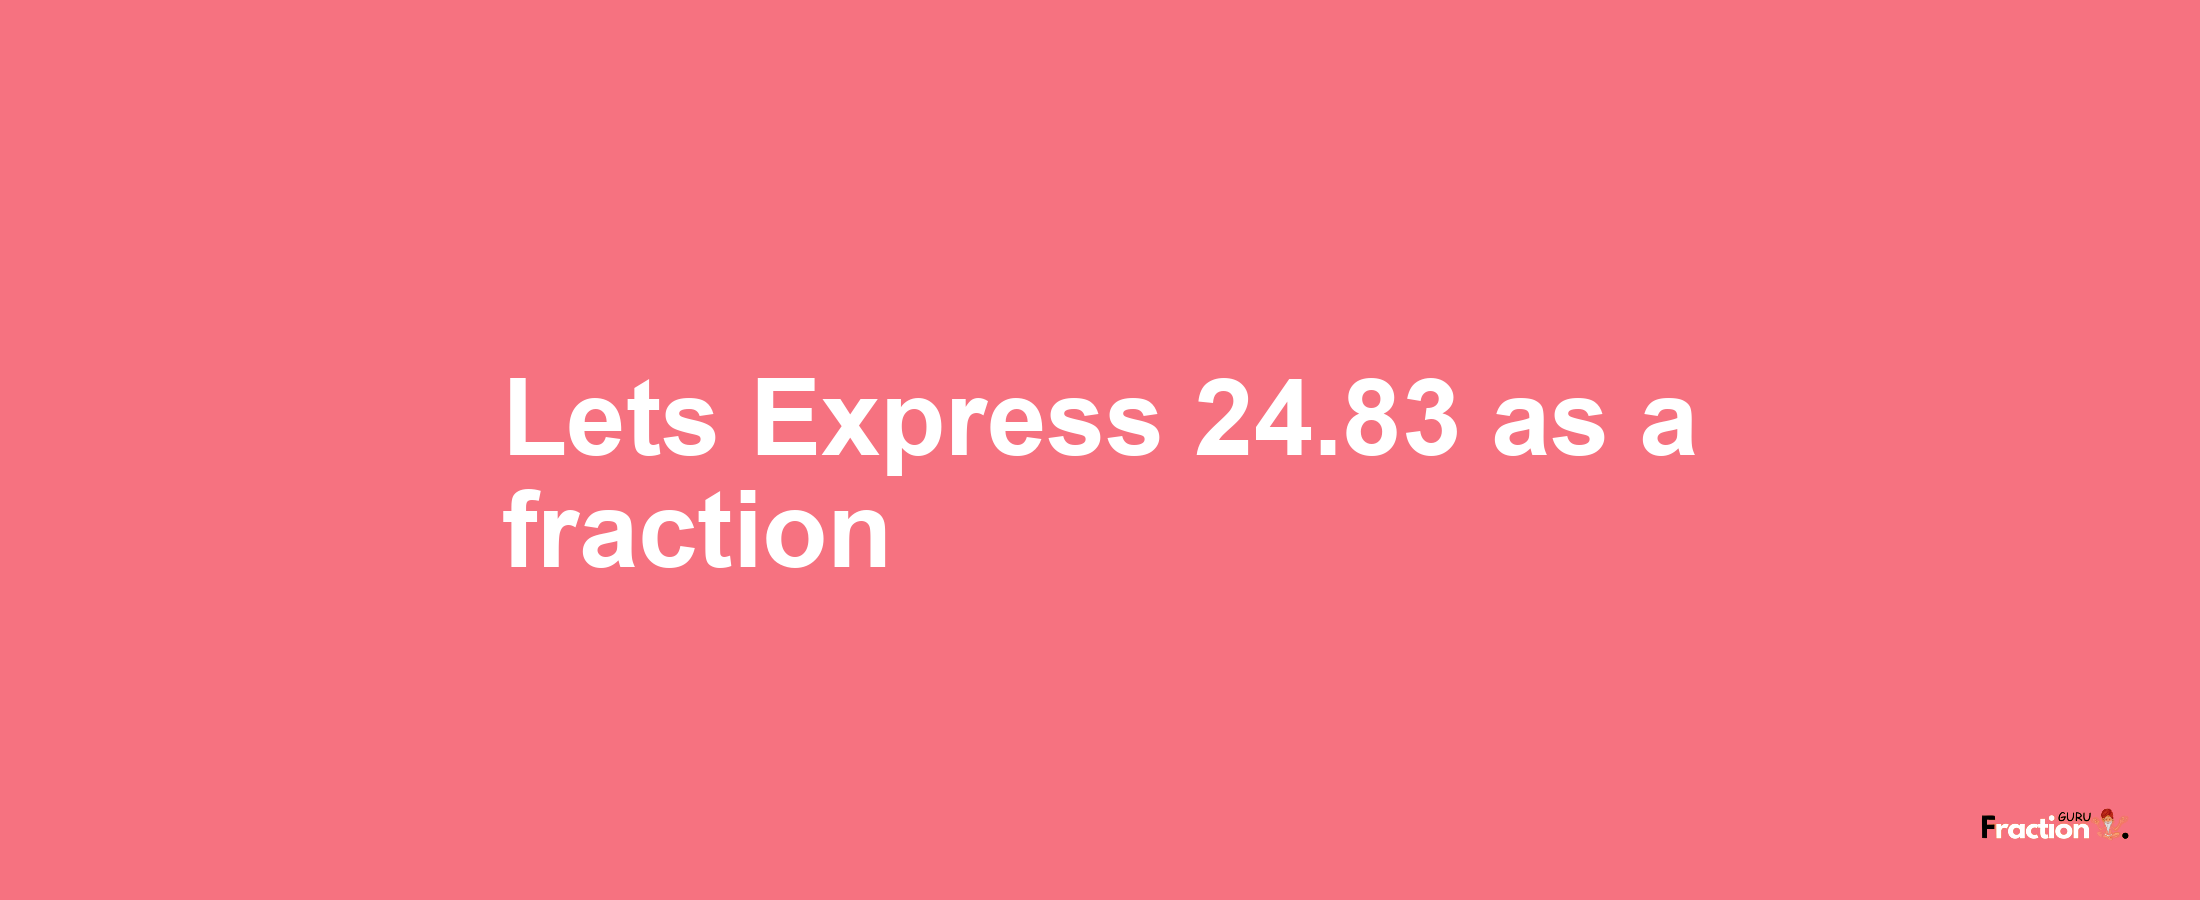 Lets Express 24.83 as afraction